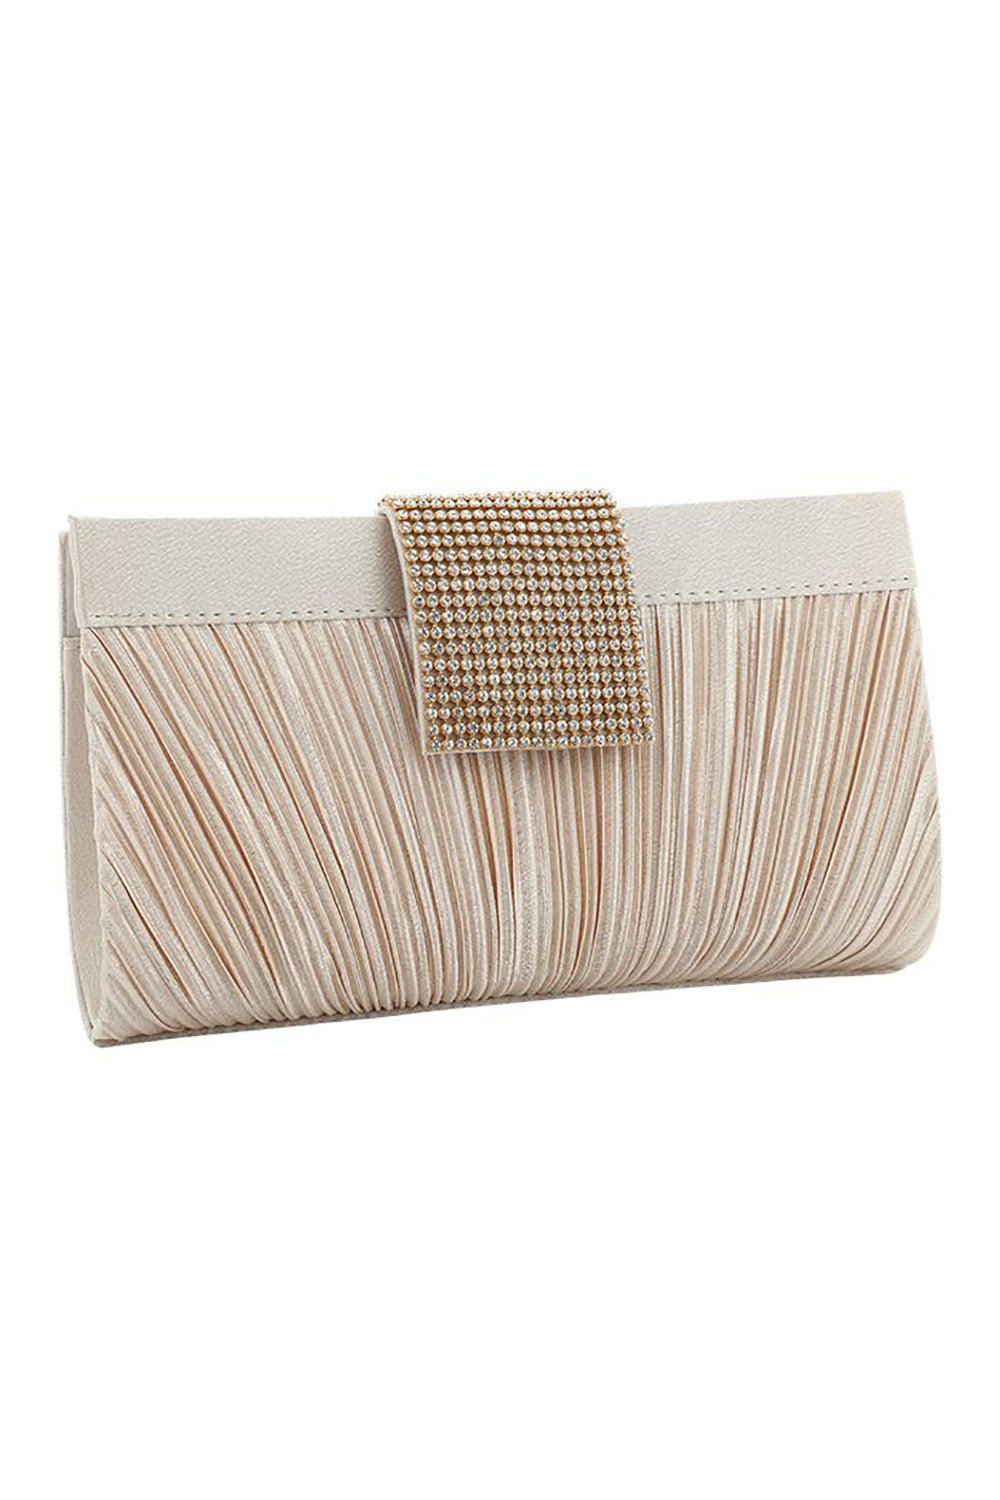 Addison Champagne Clutch – The Formal Gallery